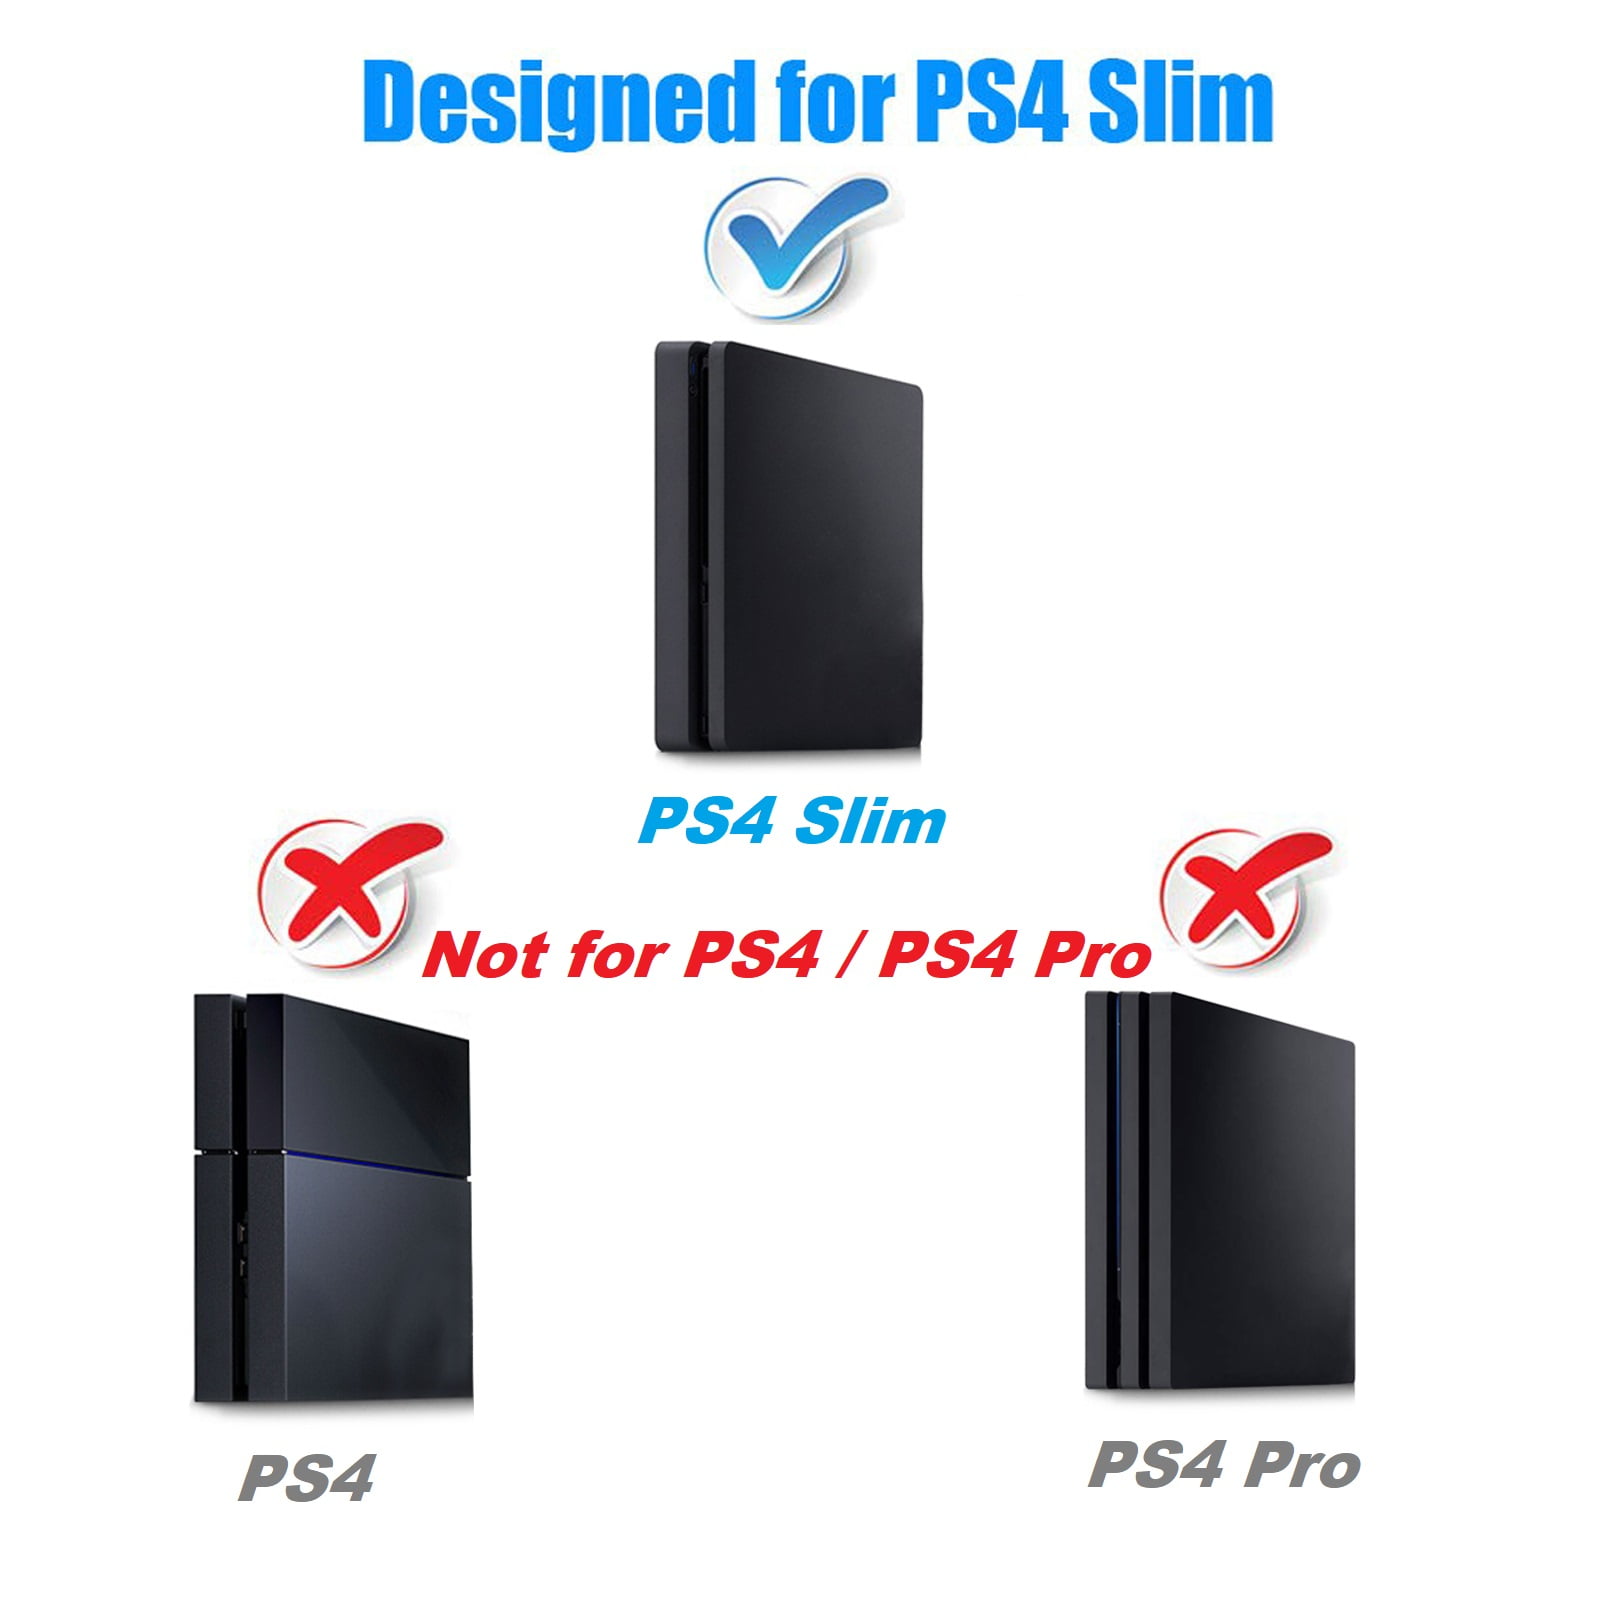 Cooling Fan Fit for PS4, Slim, TSV External USB Cooler with Auto Temperature Radiator with Sony PlayStation 4 Console - Walmart.com